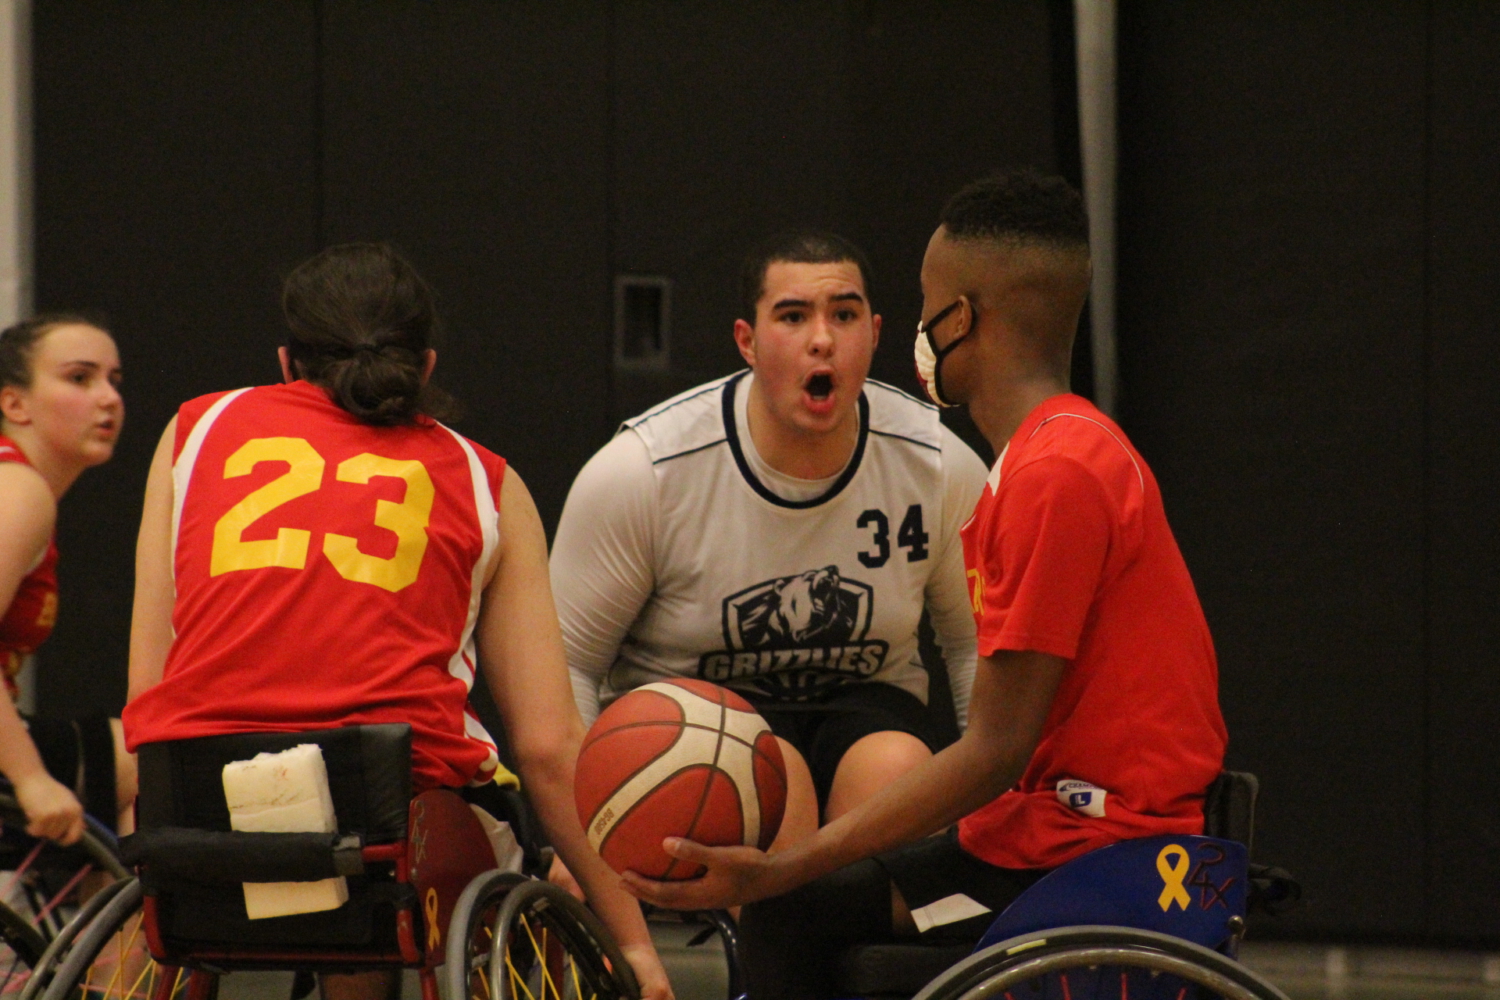 One of the youth wheelchair basketball players defending the ball from the other team